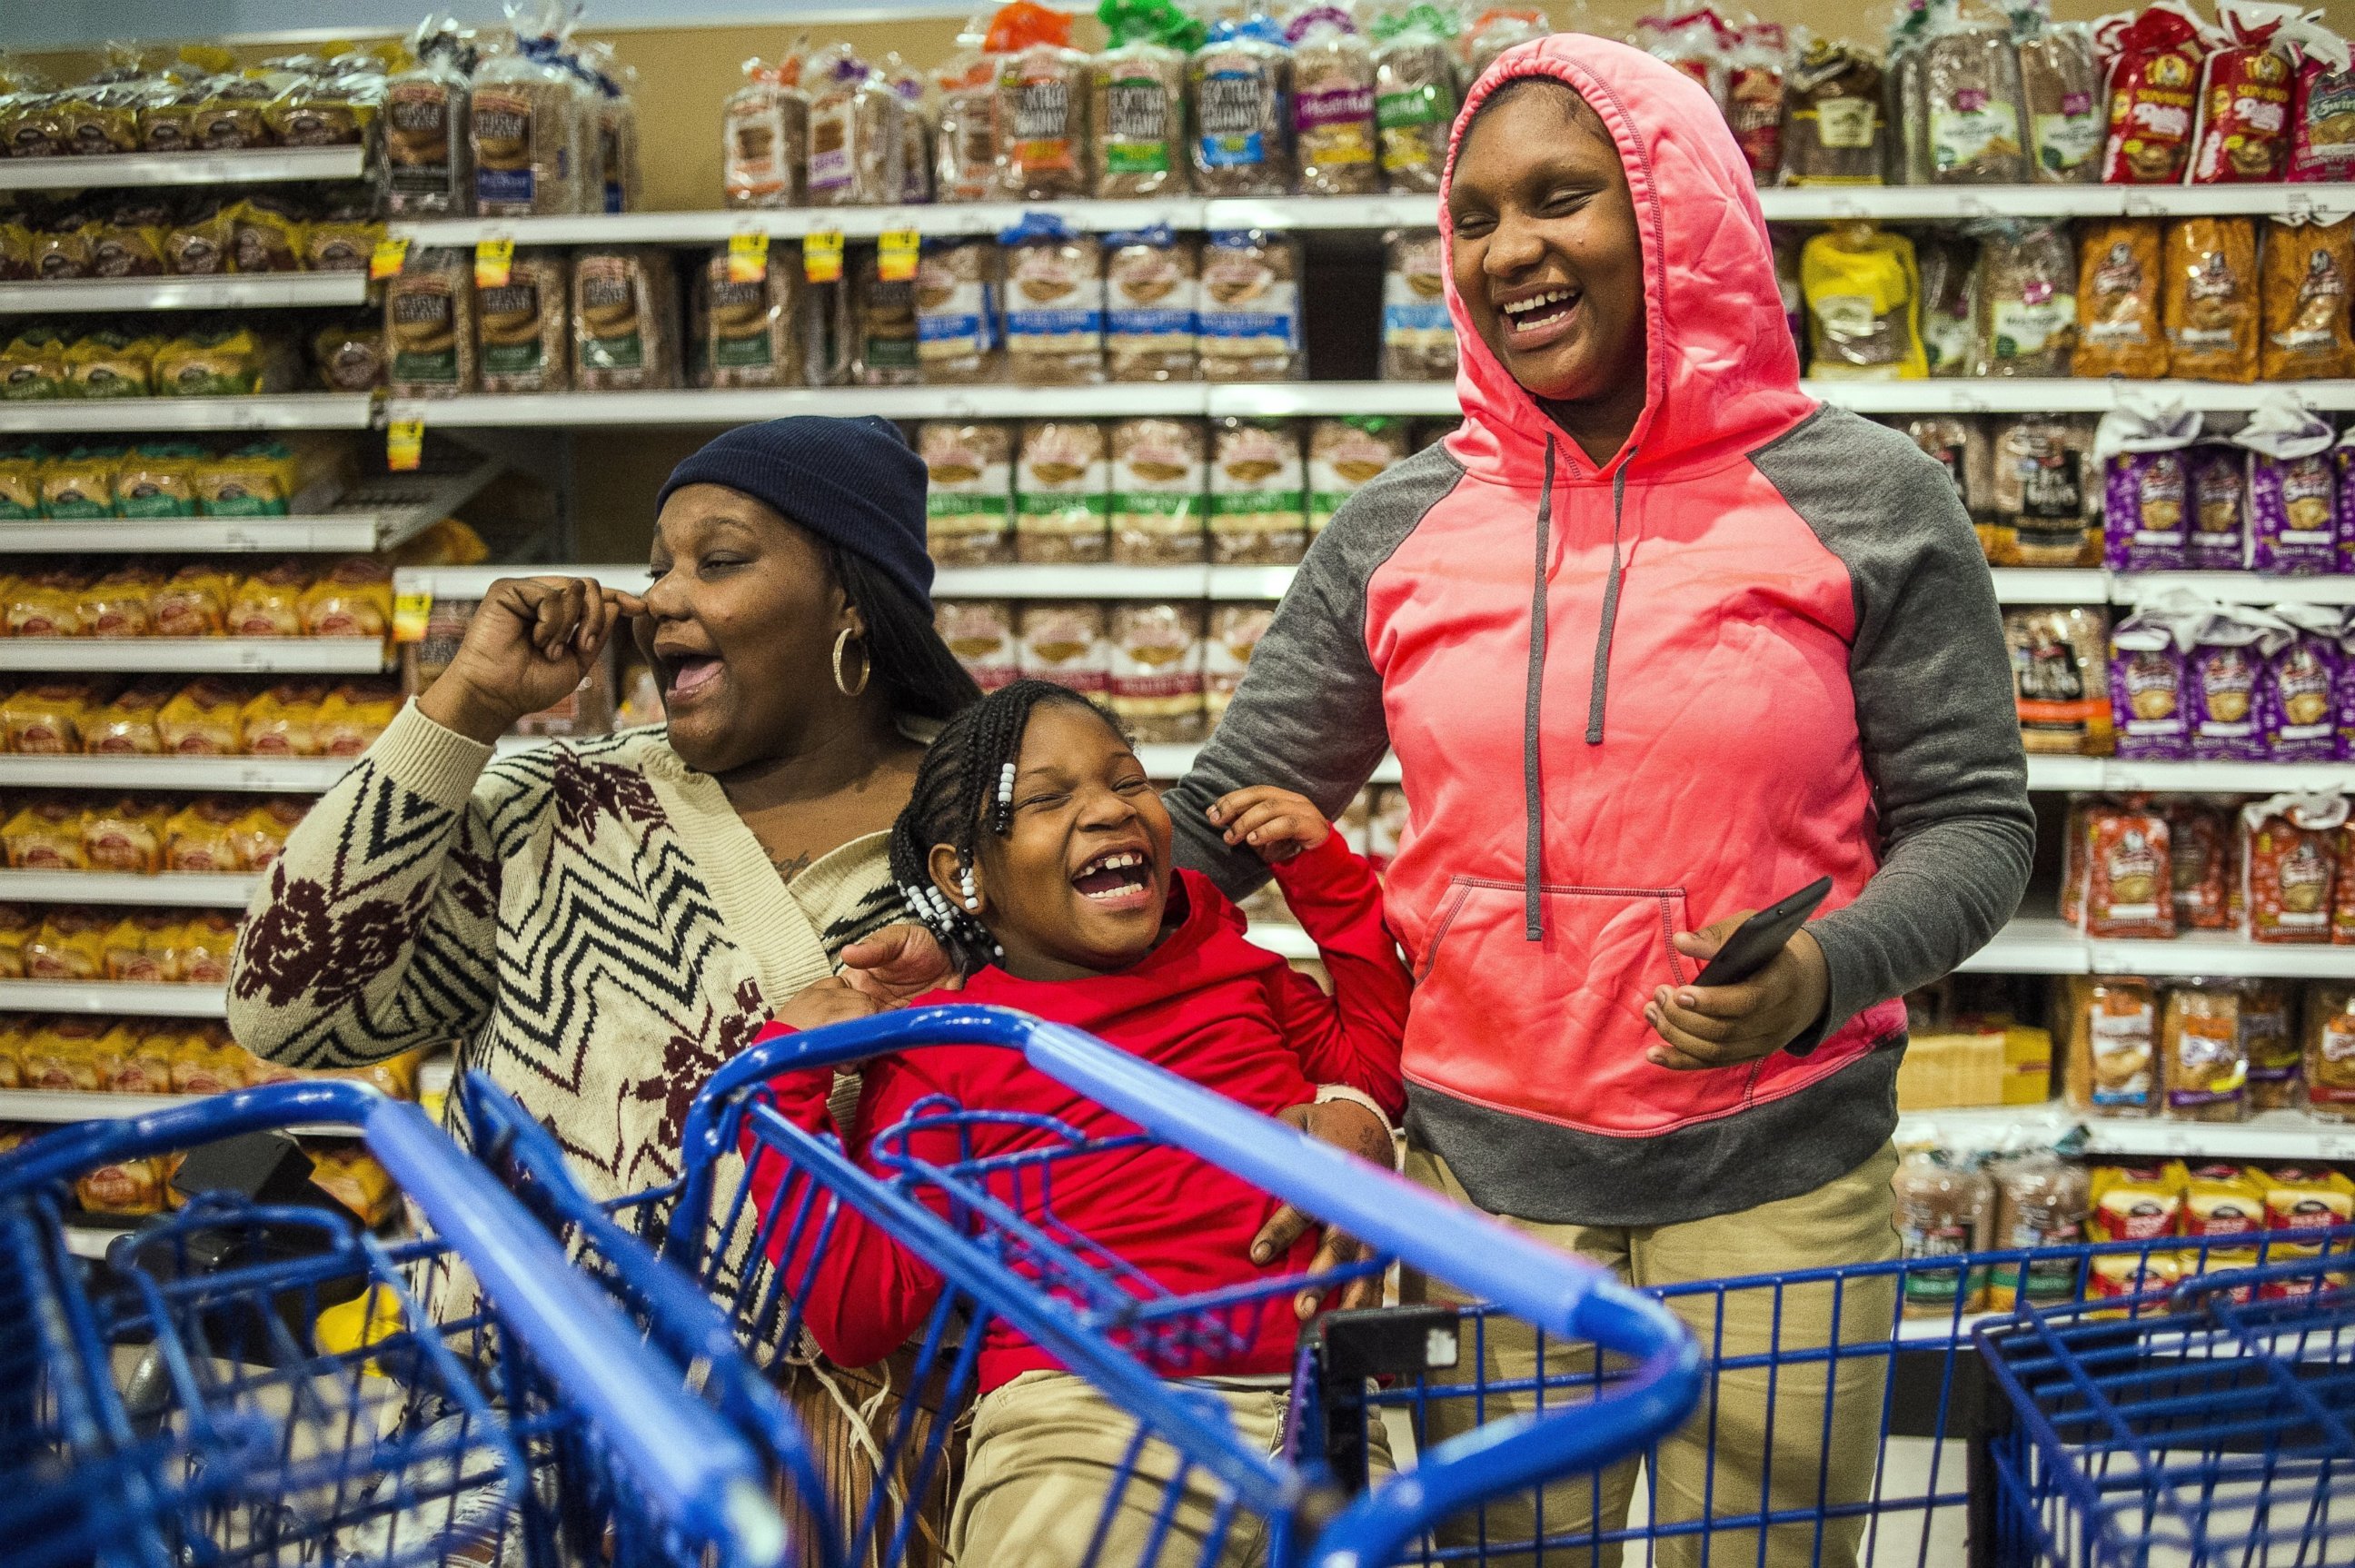 PHOTO: Flint resident Tiesha Taylor and her daughters Mariah, 7, and Kaerya, 12, laugh aloud together at an event inside a Meijer store in Burton, Mich. on Dec. 6, 2016.